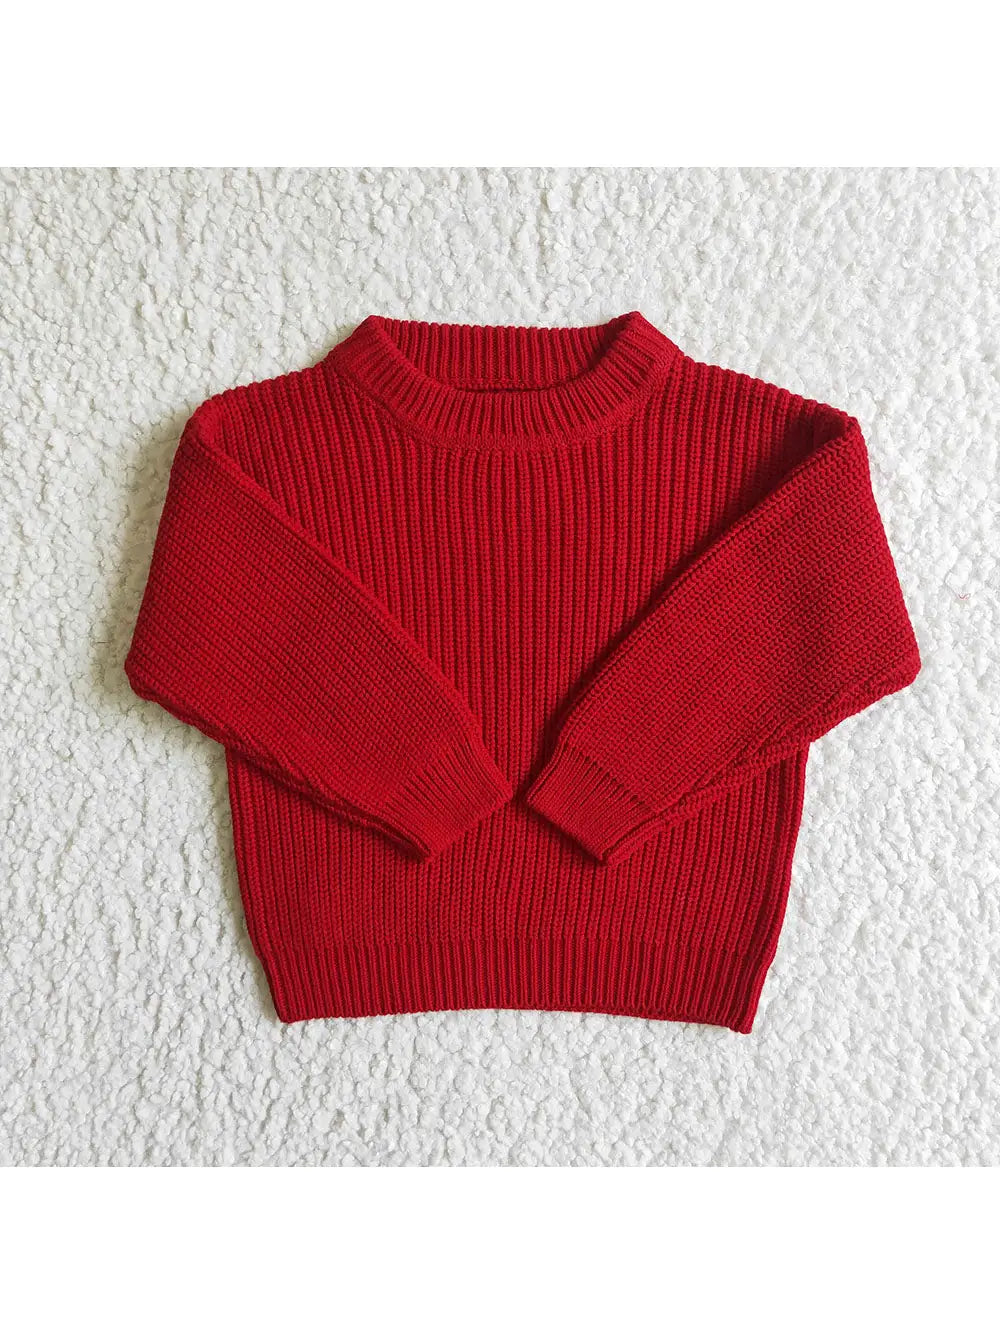 Rowdy Red Sweater